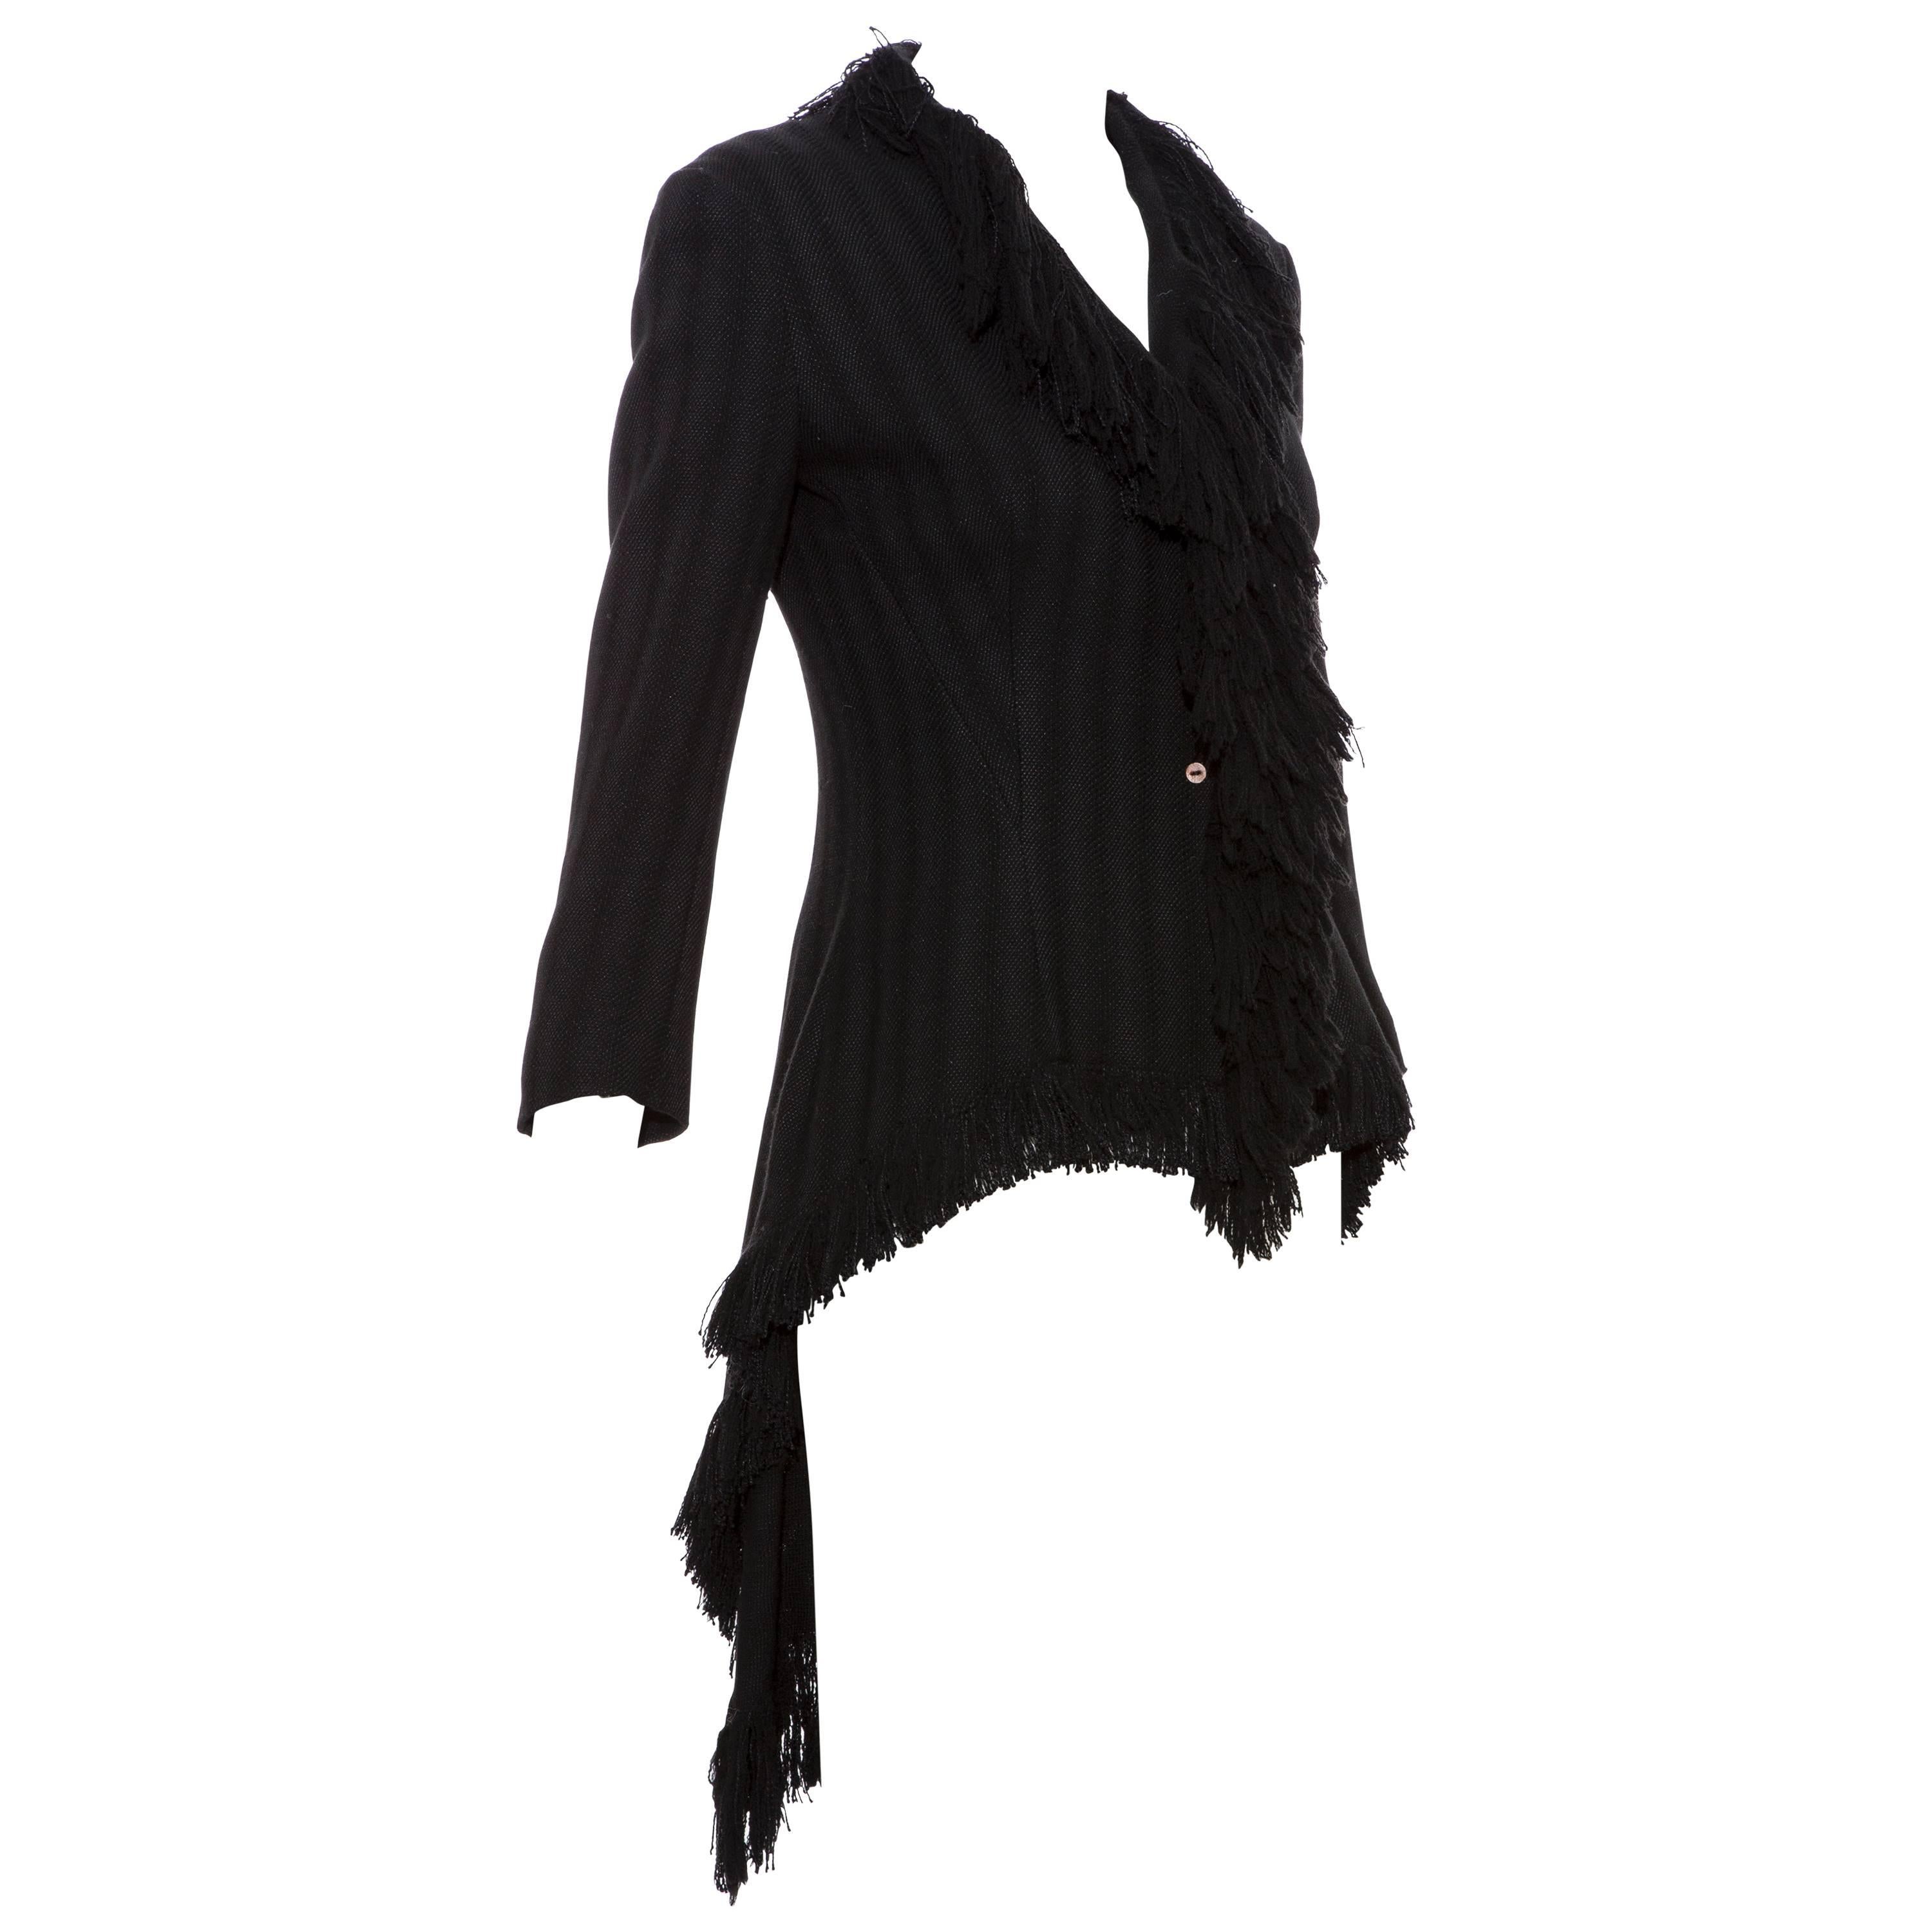 Yohji Yamamoto, Fall 2013, black tweed cutaway jacket with crew neck, fringe trim throughout and leather button closures at front. 

Size not listed, estimated from measurements.

 Bust 35”, Waist 28”, Shoulder 17”, Length 36”, Sleeve 23.5”